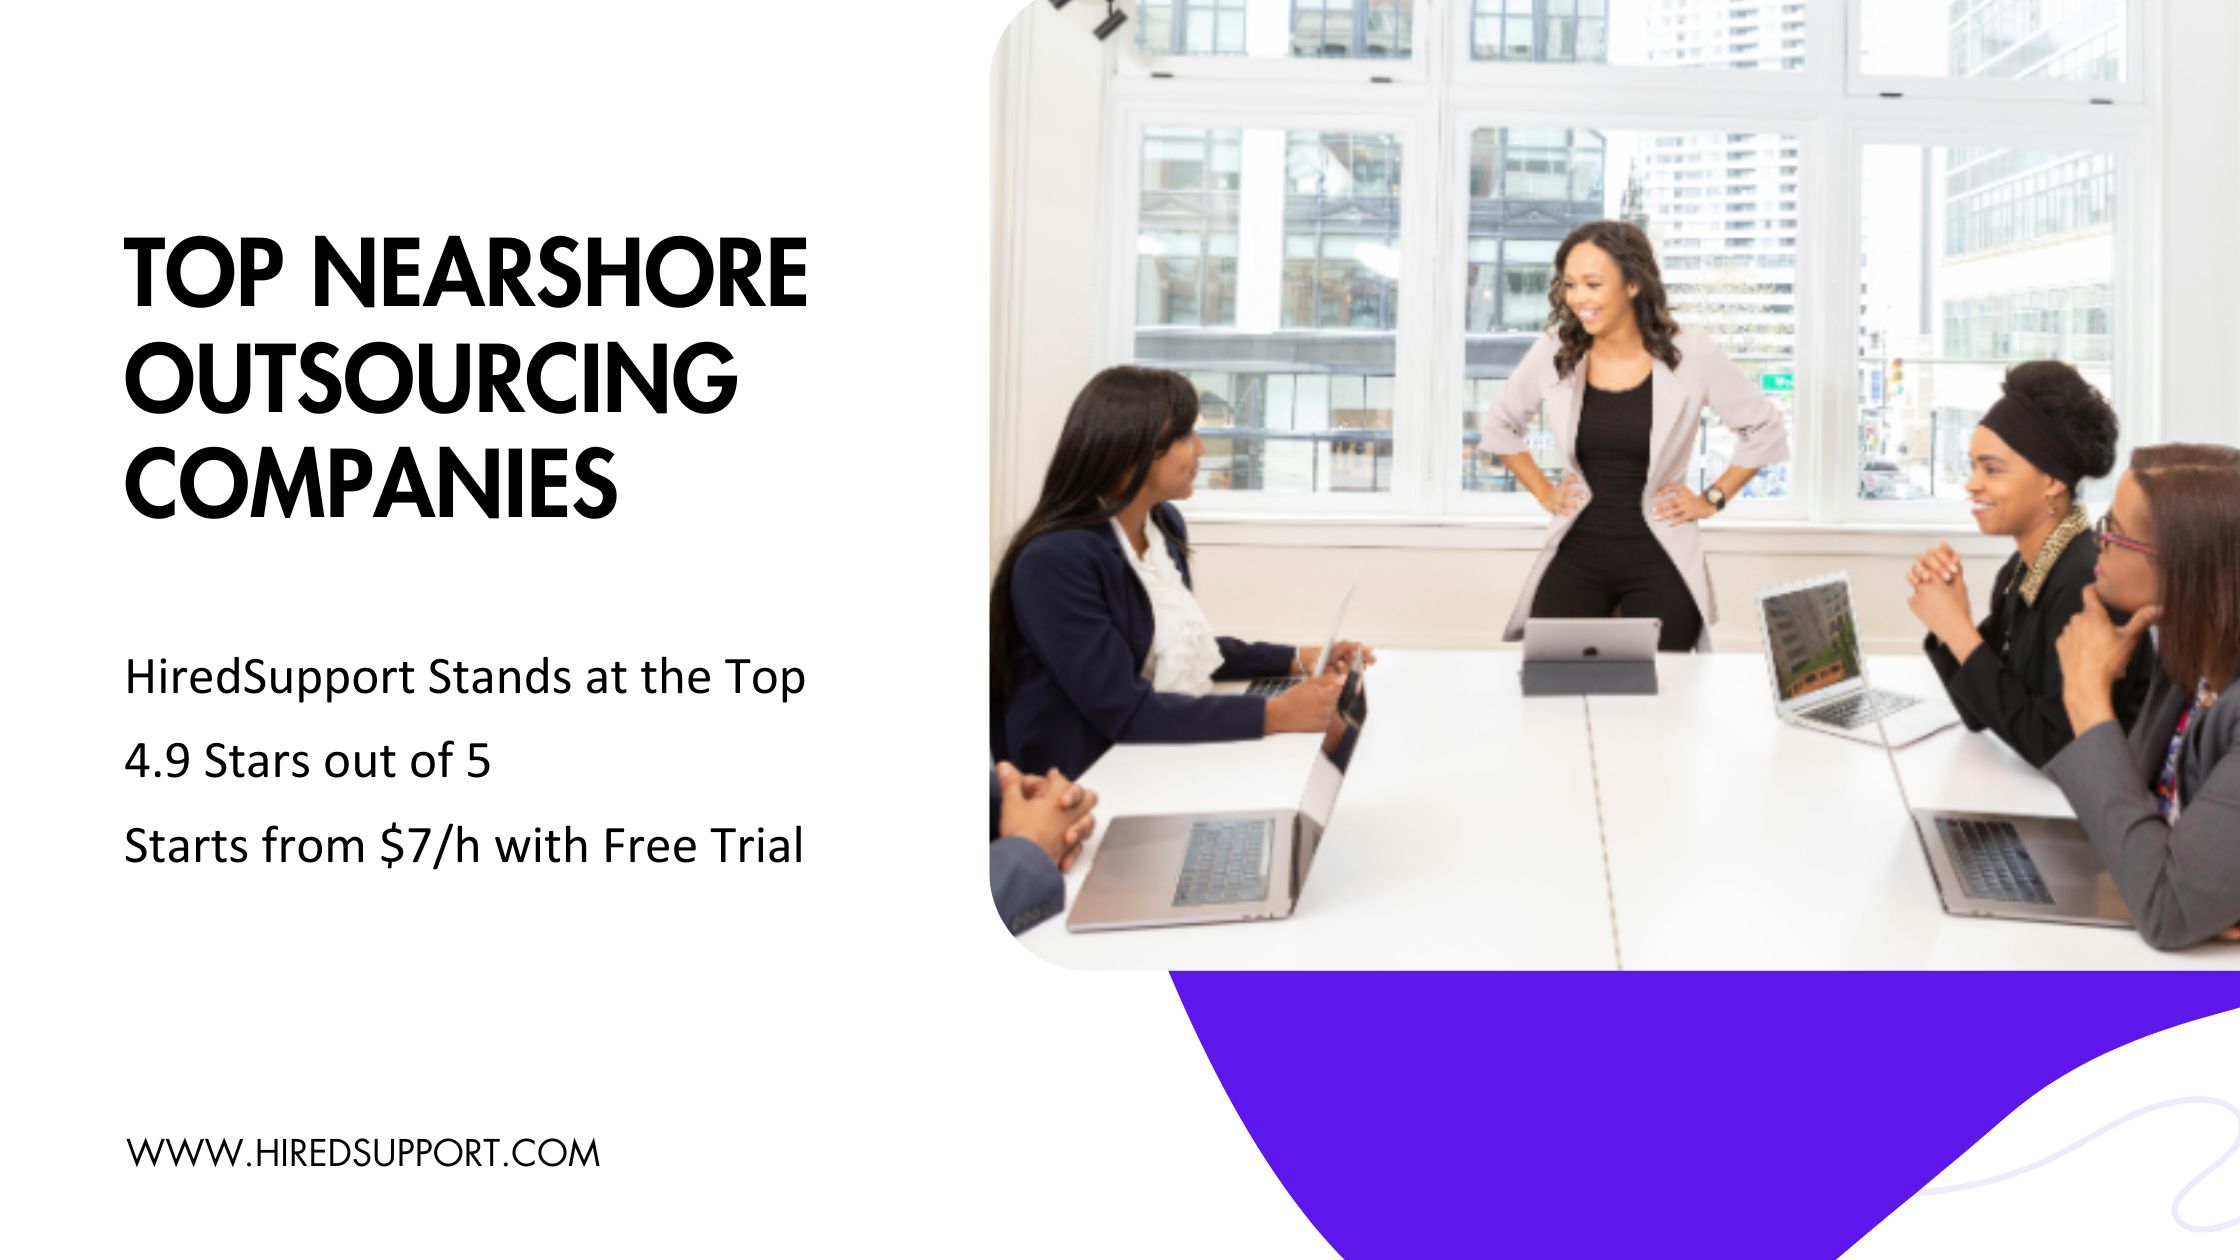 Top Nearshore Outsourcing Companies